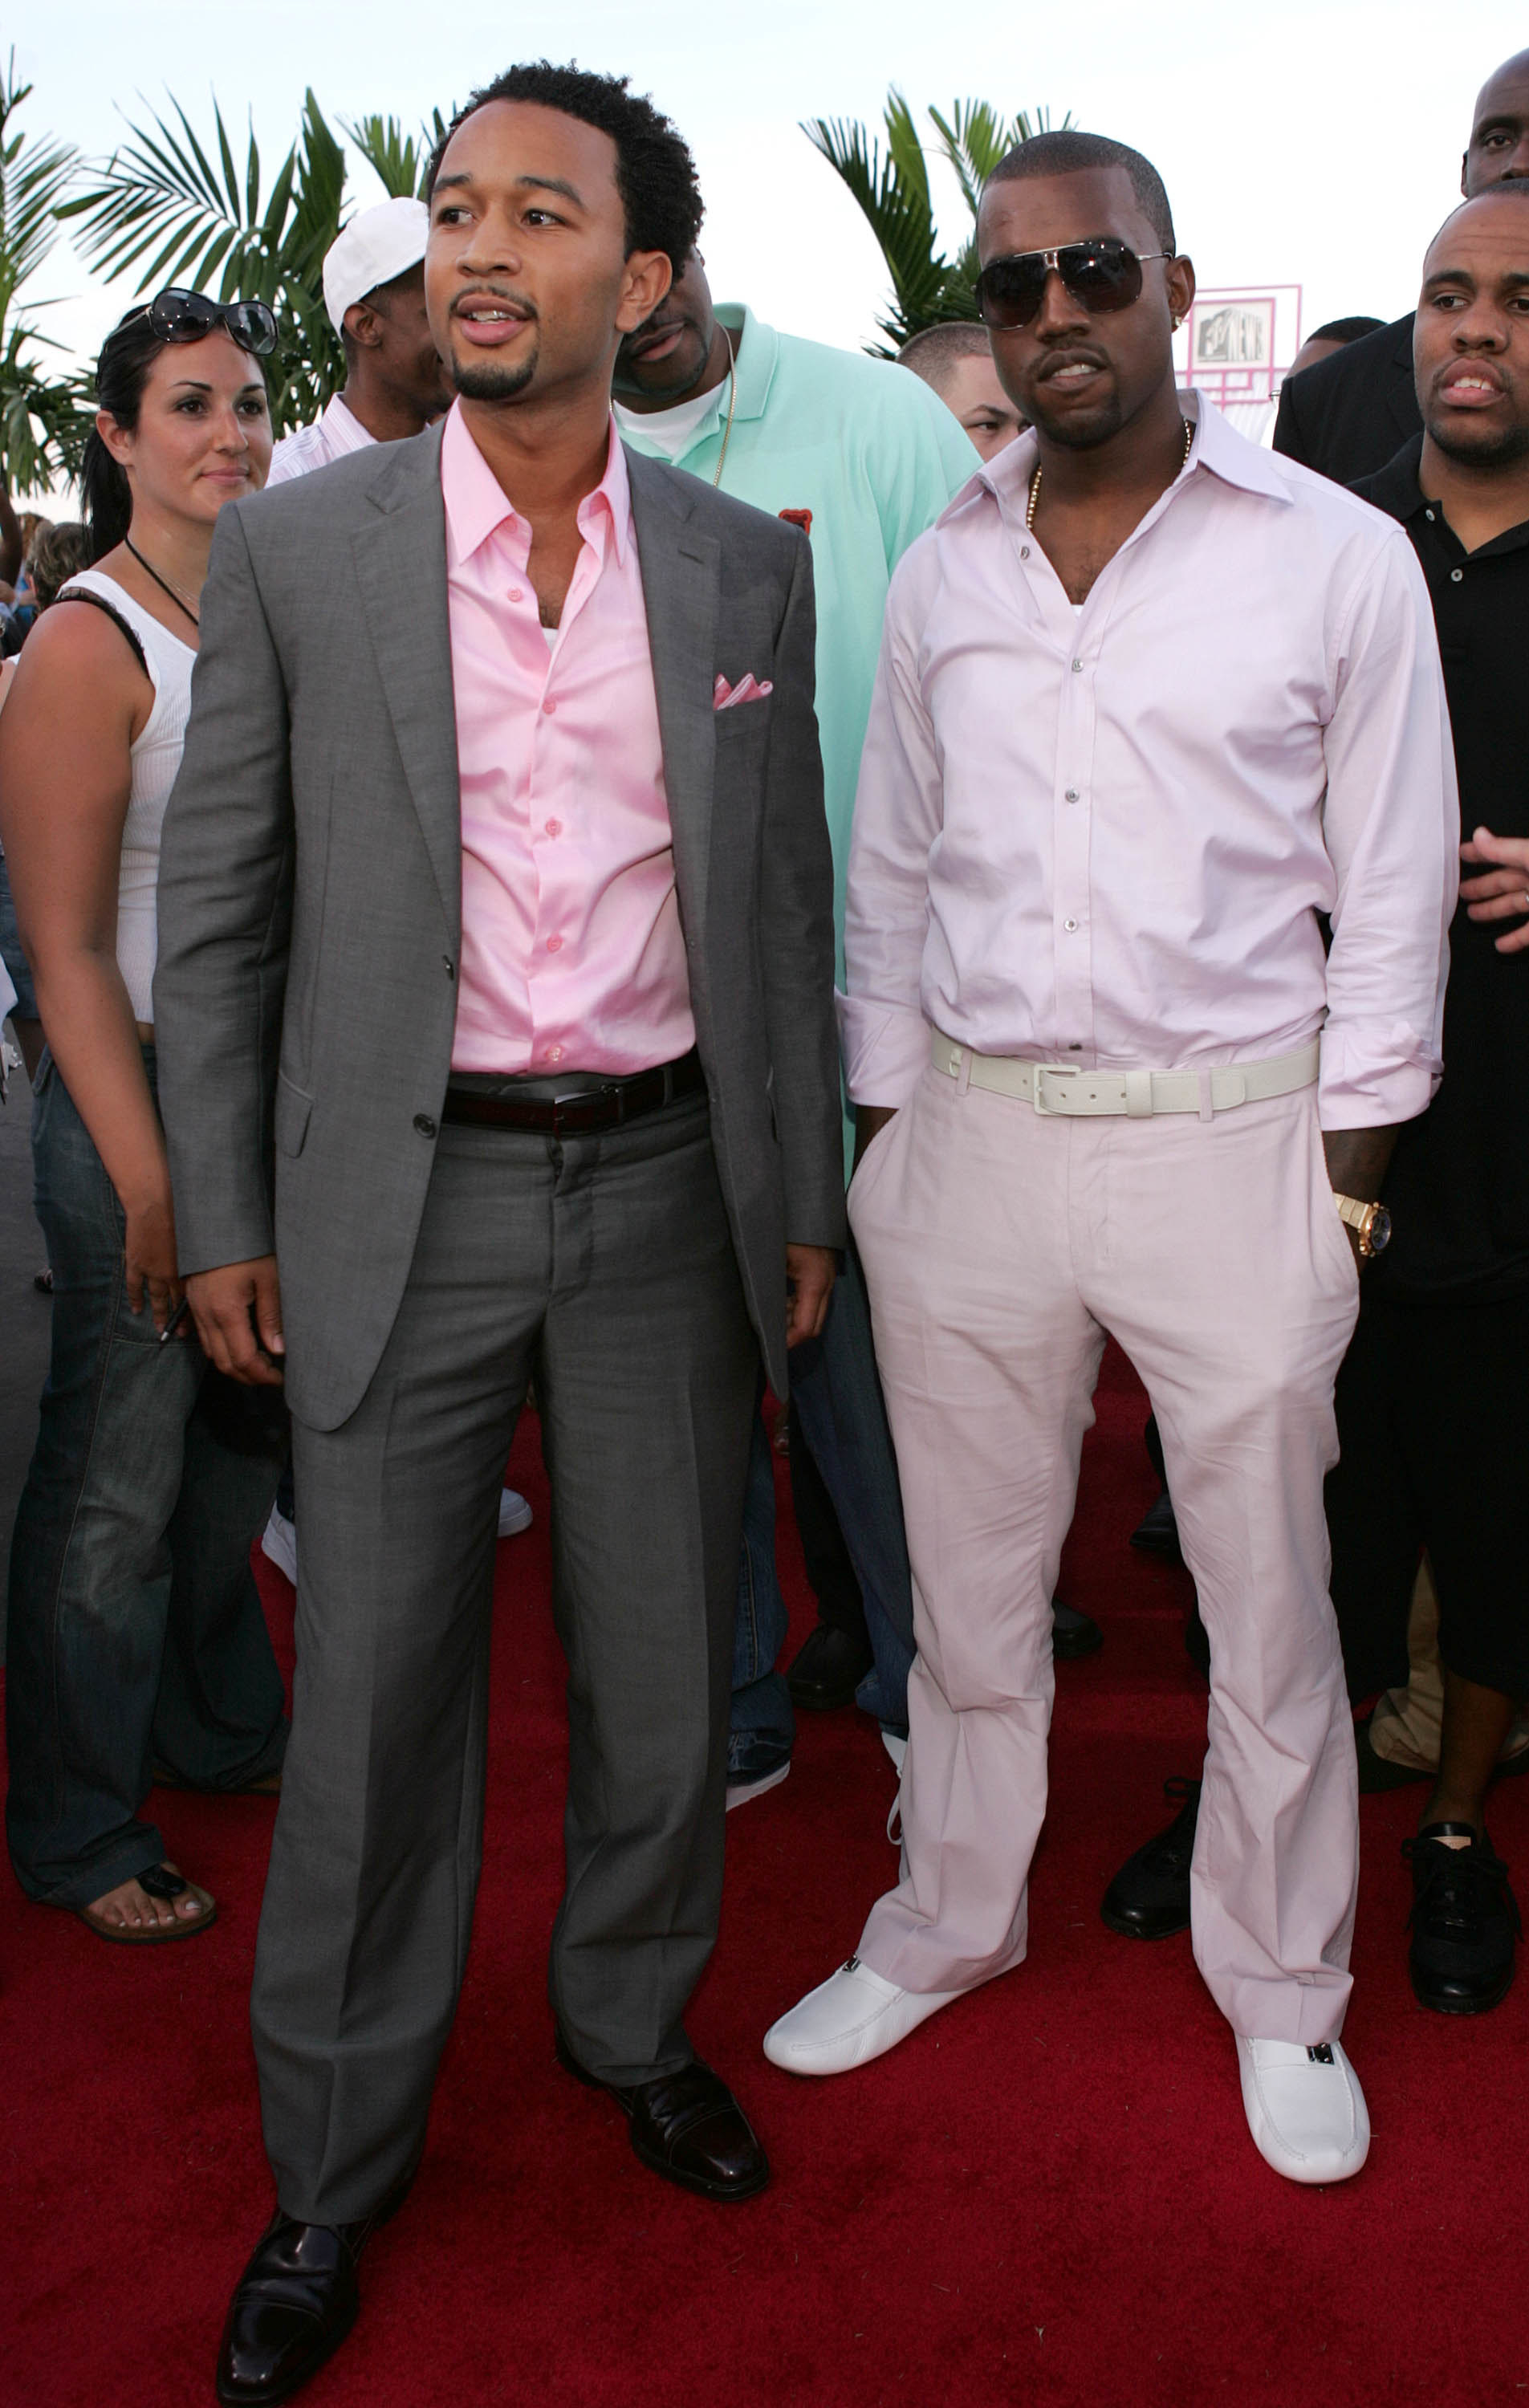 John Legend and Kanye West at the 2004 MTV Video Music Awards